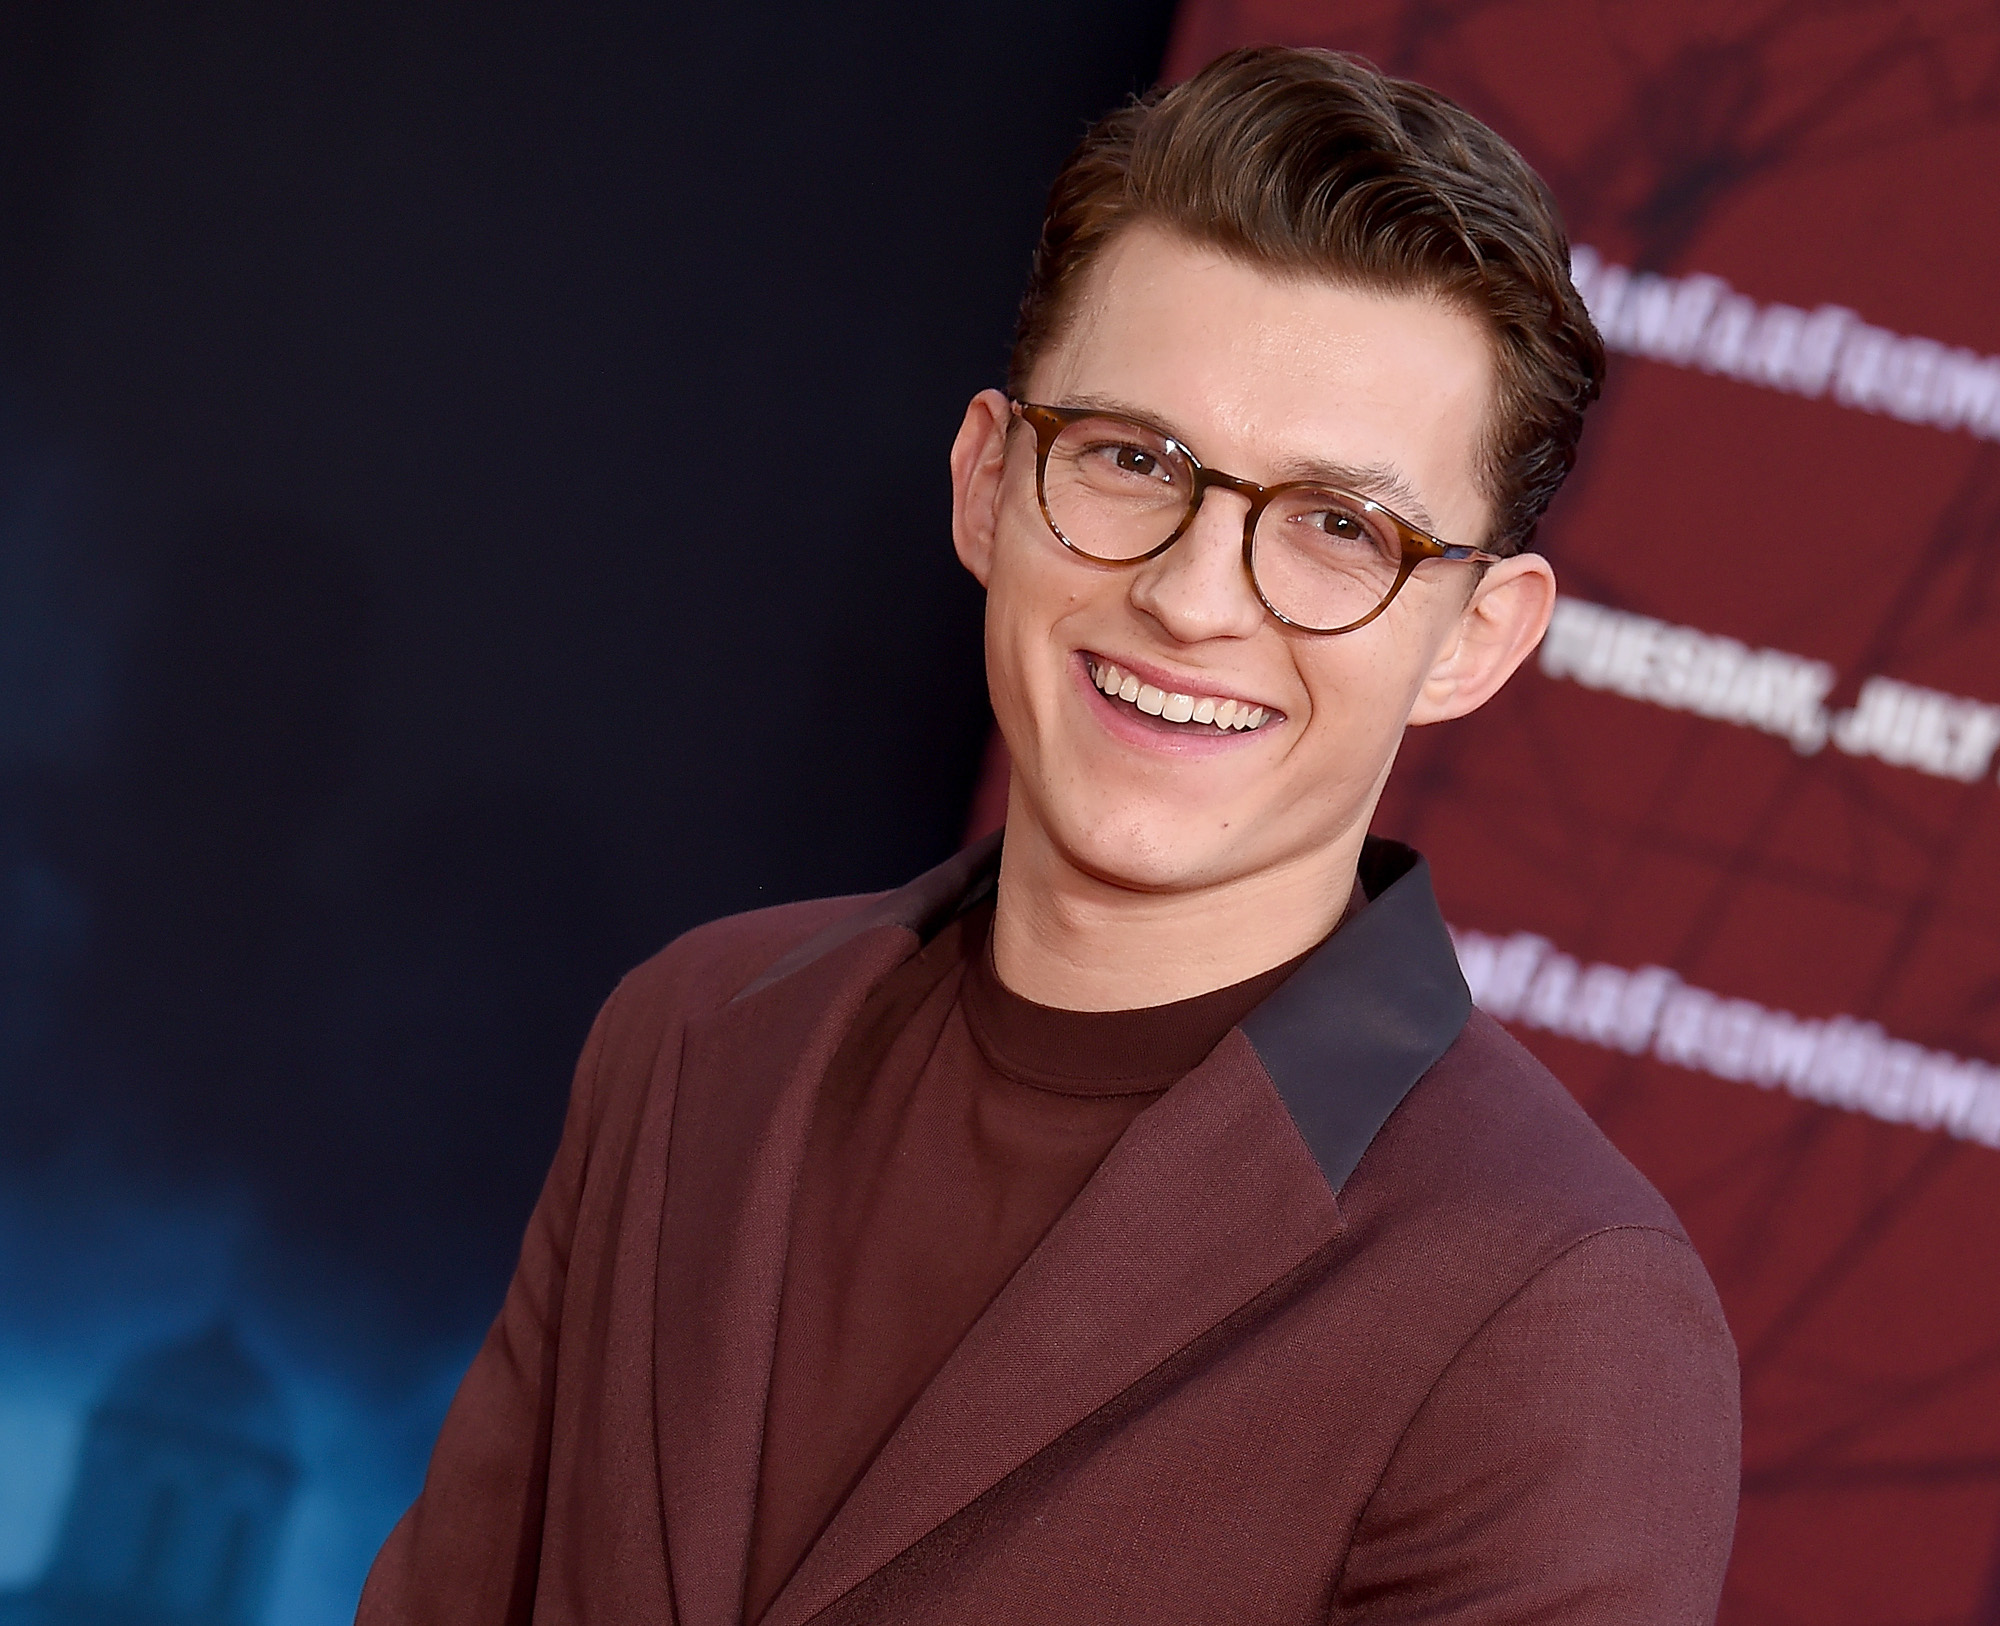 Tom Holland, who will star as Nathan Drake in Sony's 'Uncharted' movie. He's wearing a brown suit and glasses, and his hair is slicked back.